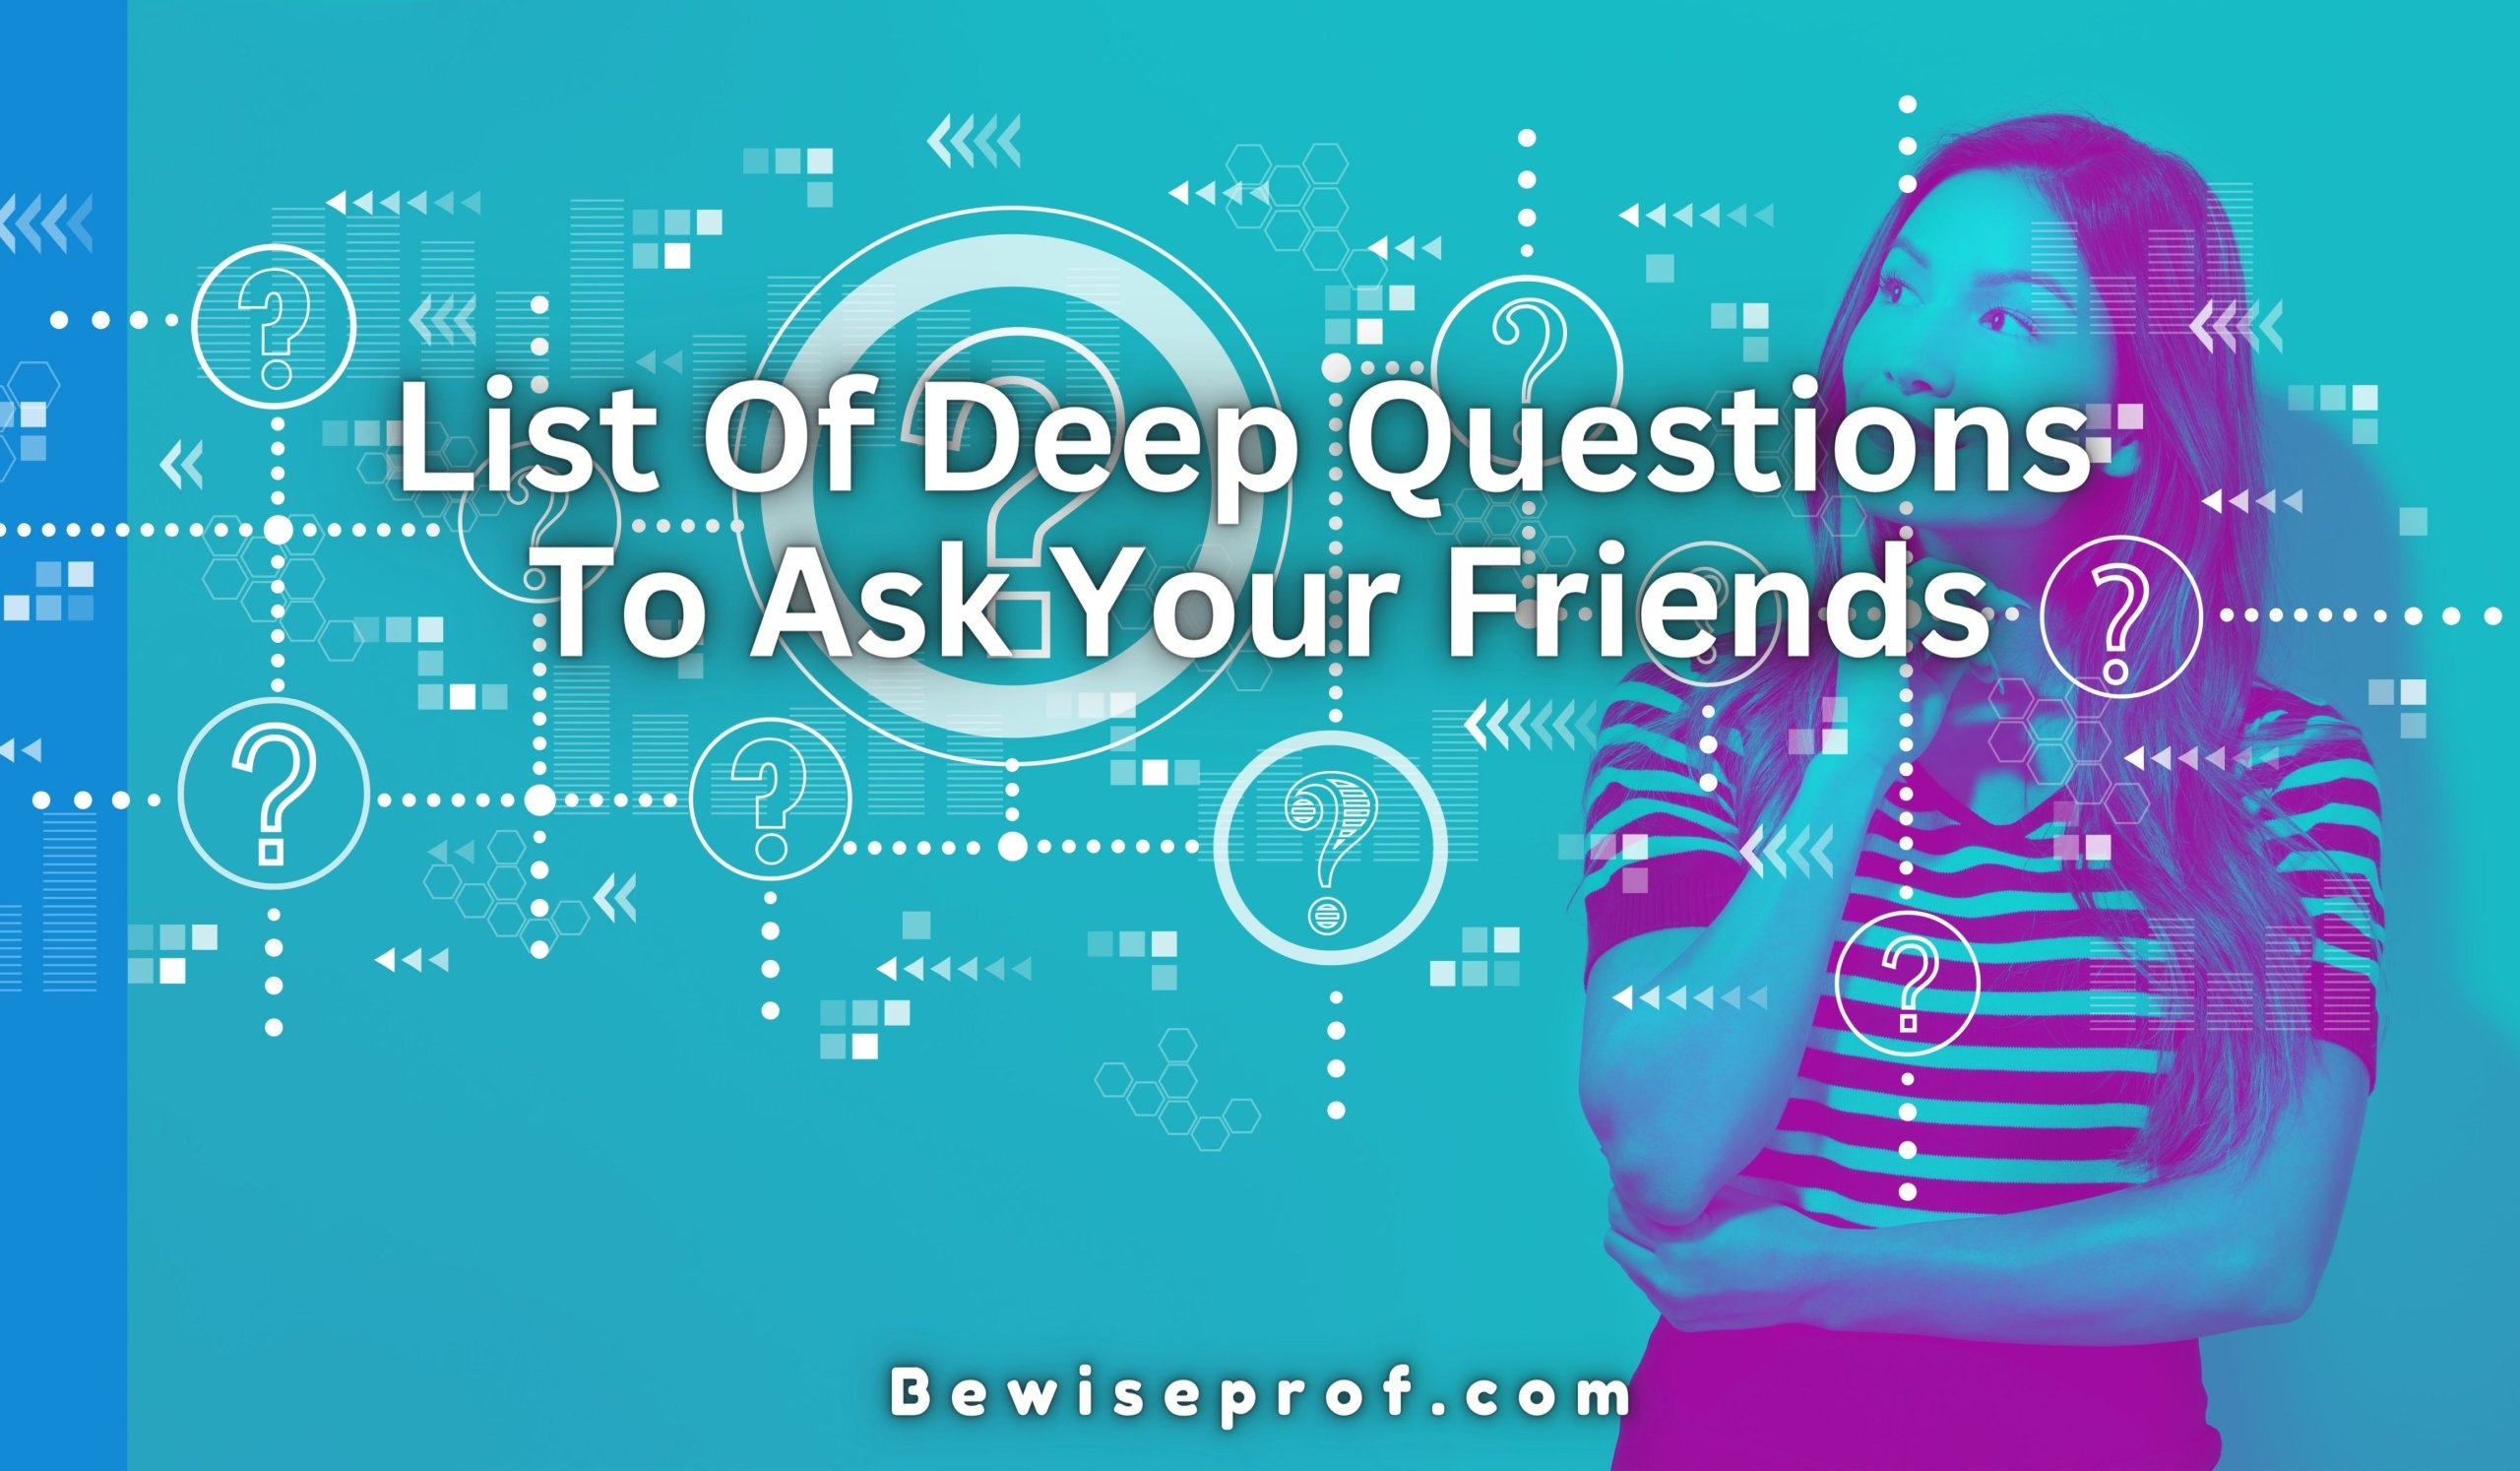 List Of Deep Questions To Ask Your Friends